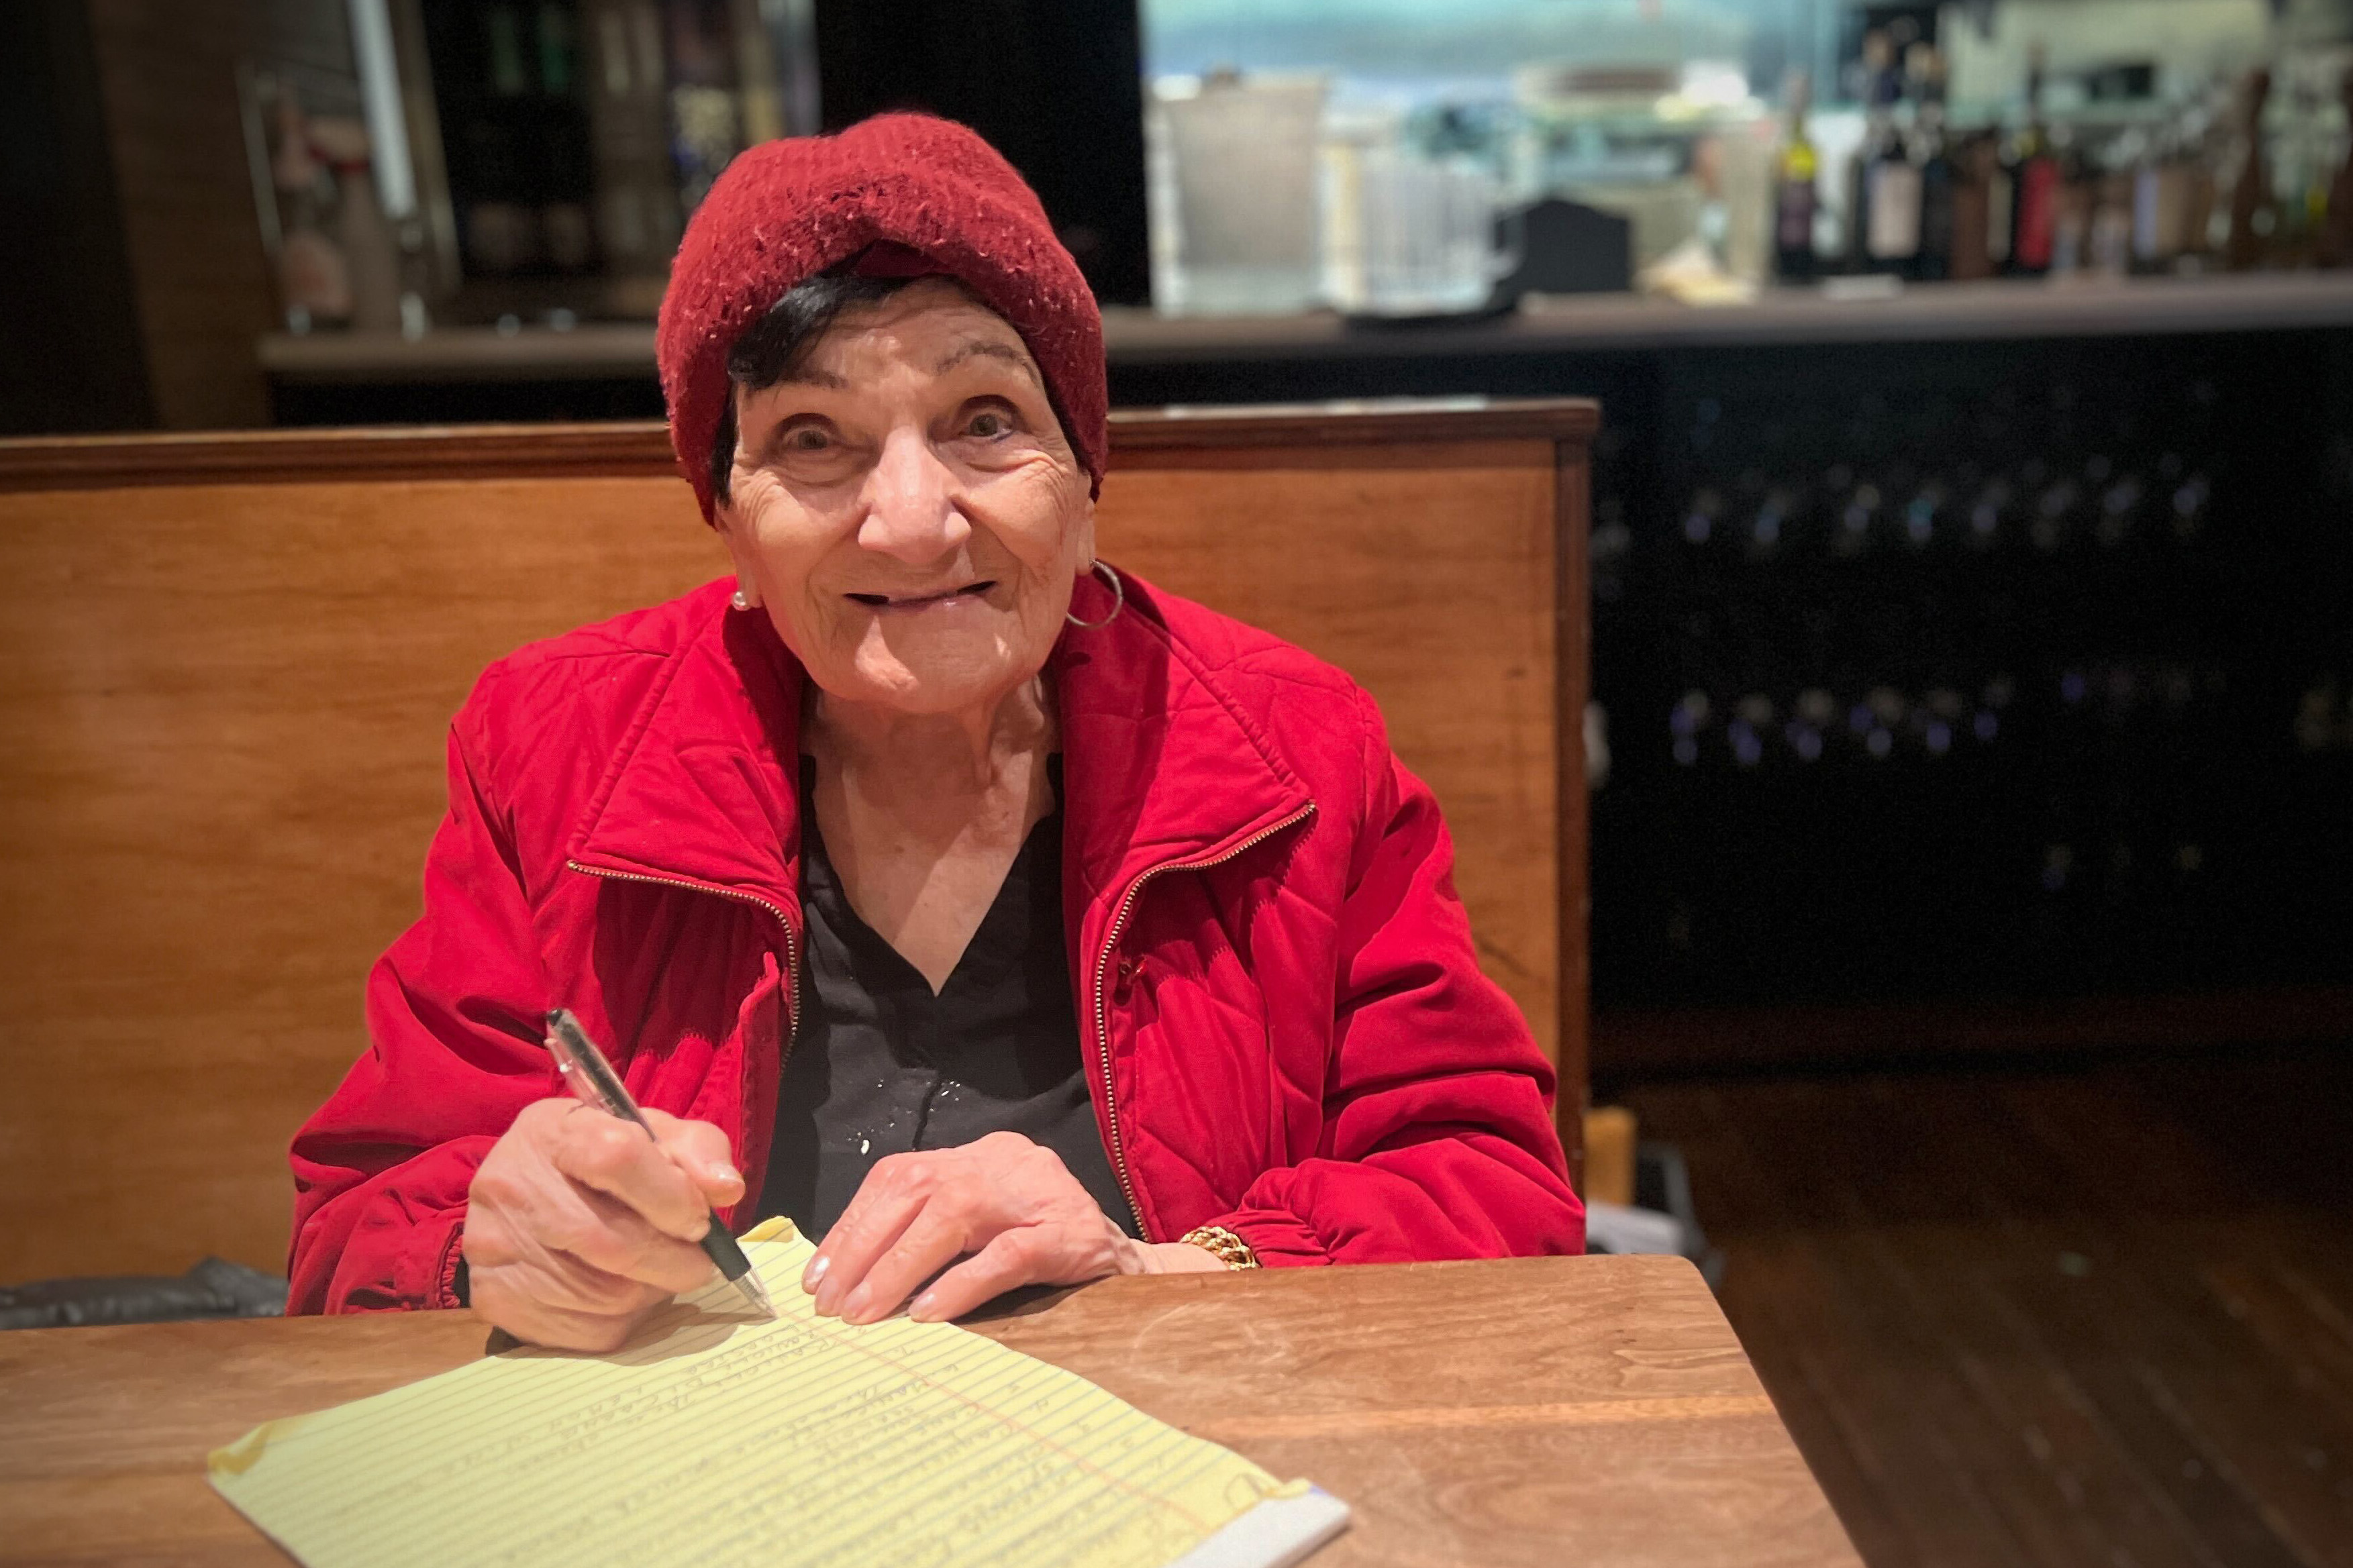 An elderly lady in a red hat and jacket smiles while writing on a yellow paper at a table.